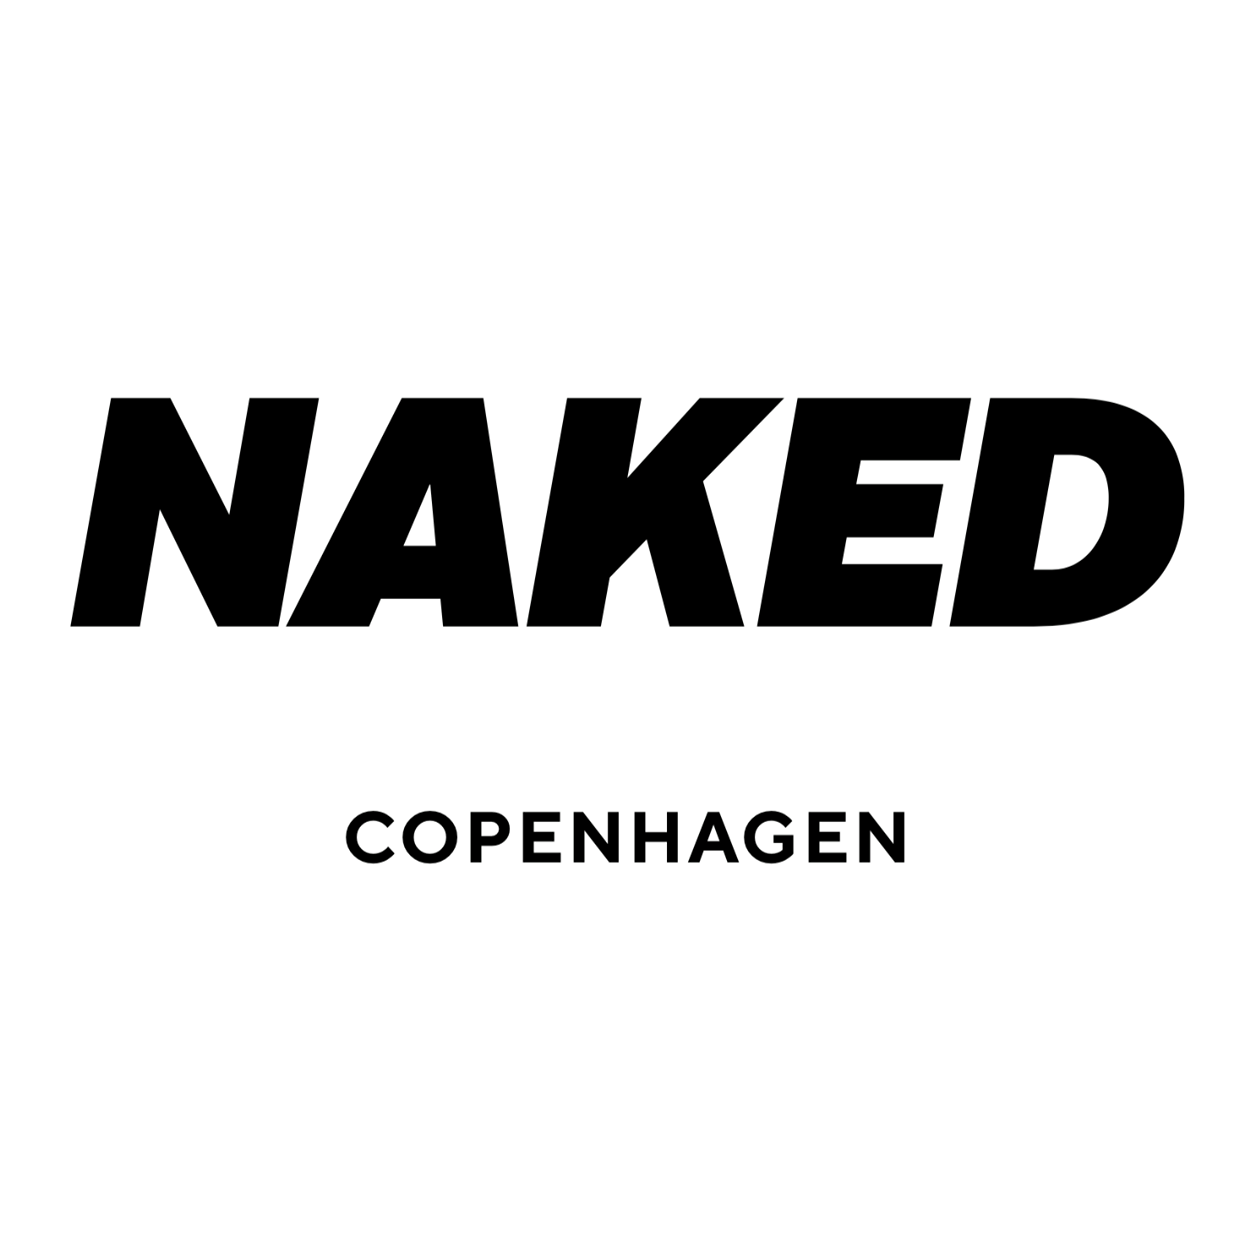 Brown sneakers and shoes NAKED Copenhagen